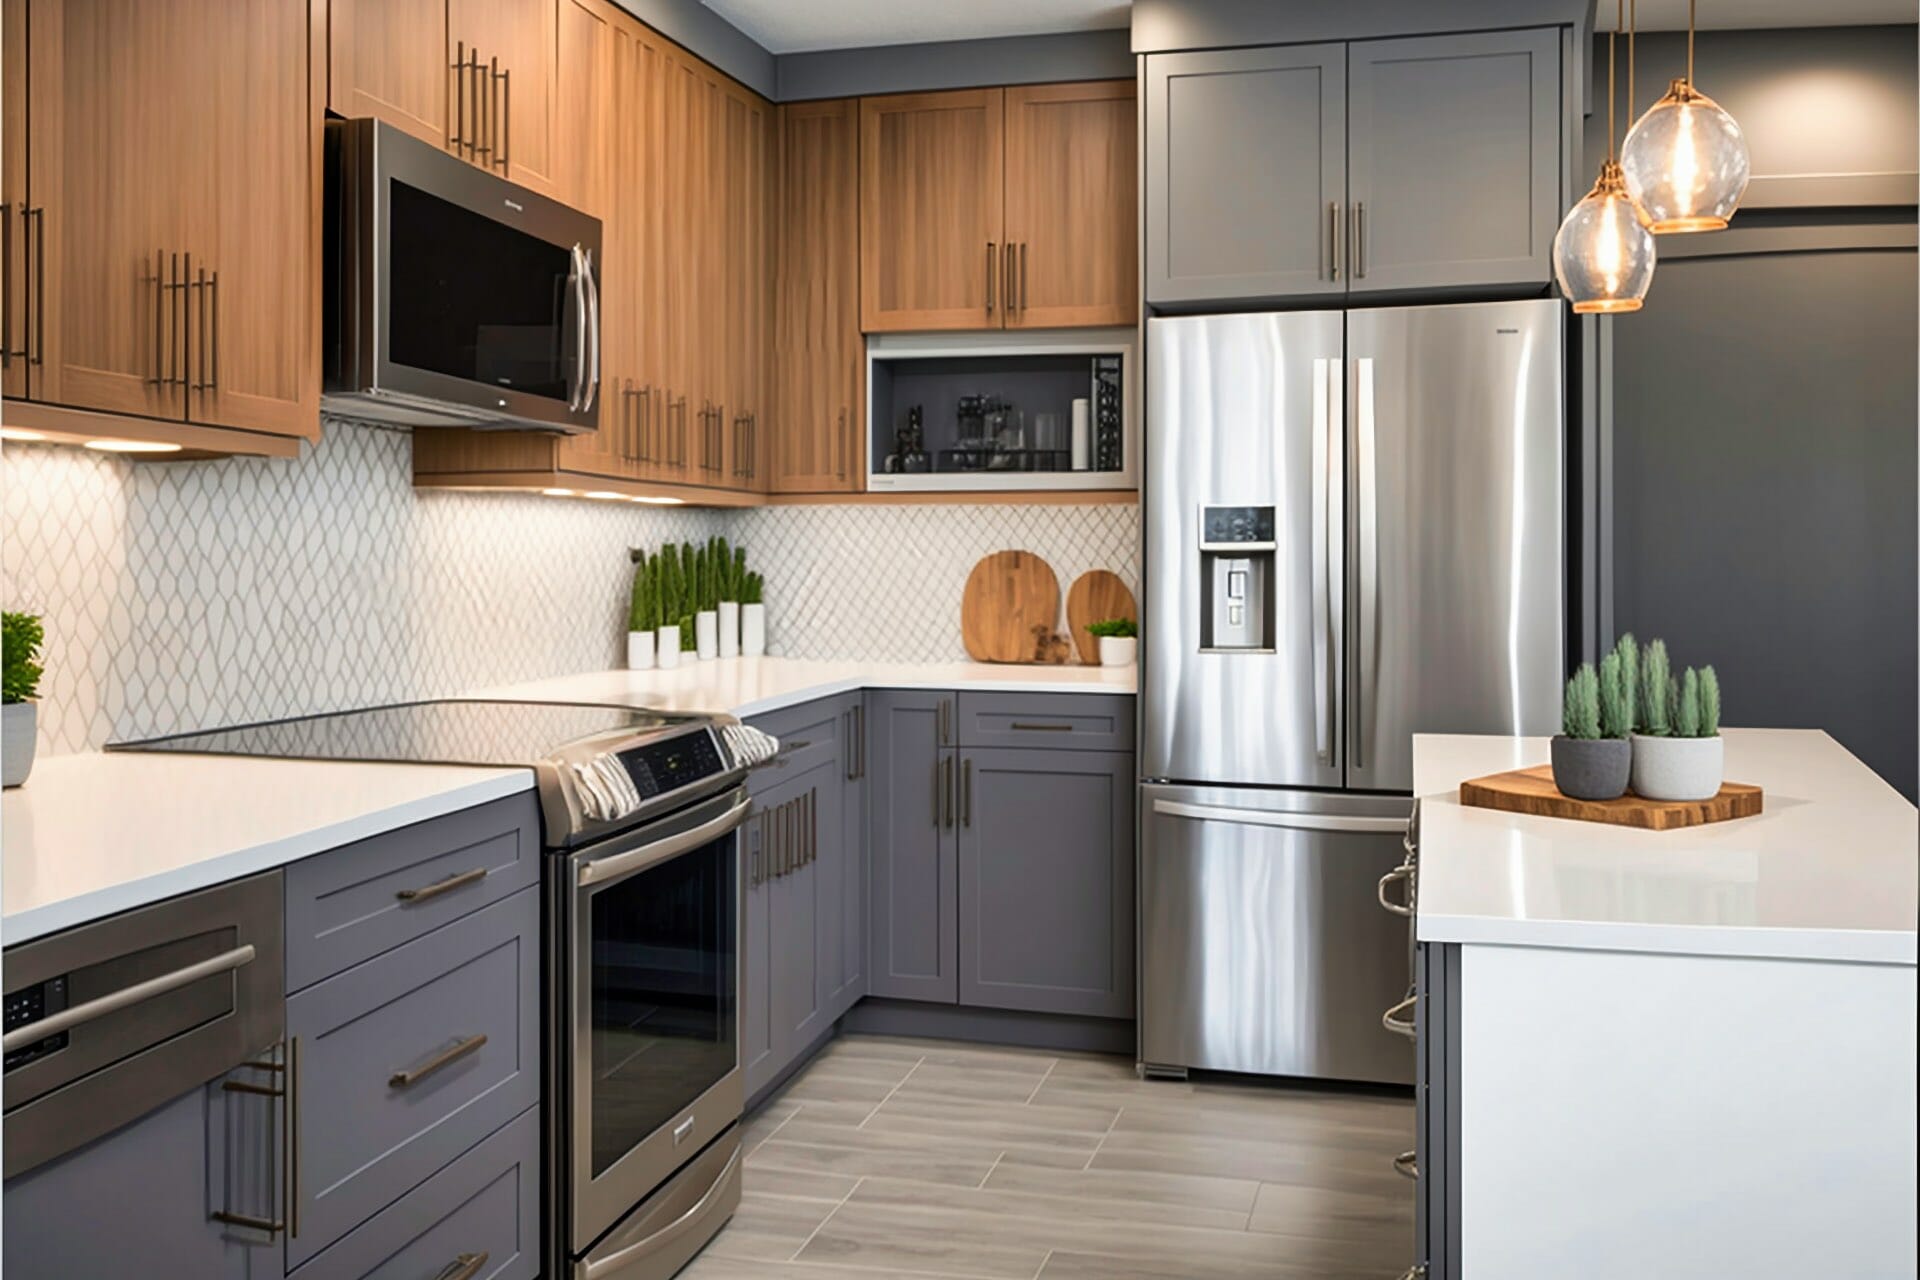 This Modern Kitchen Features Soft Grey Cabinetry And White Countertops, Creating A Chic And Inviting Atmosphere. The Stainless Steel Appliances And Warm Wood Accents Add A Modern Touch, While The Neutral Backsplash Completes The Look.